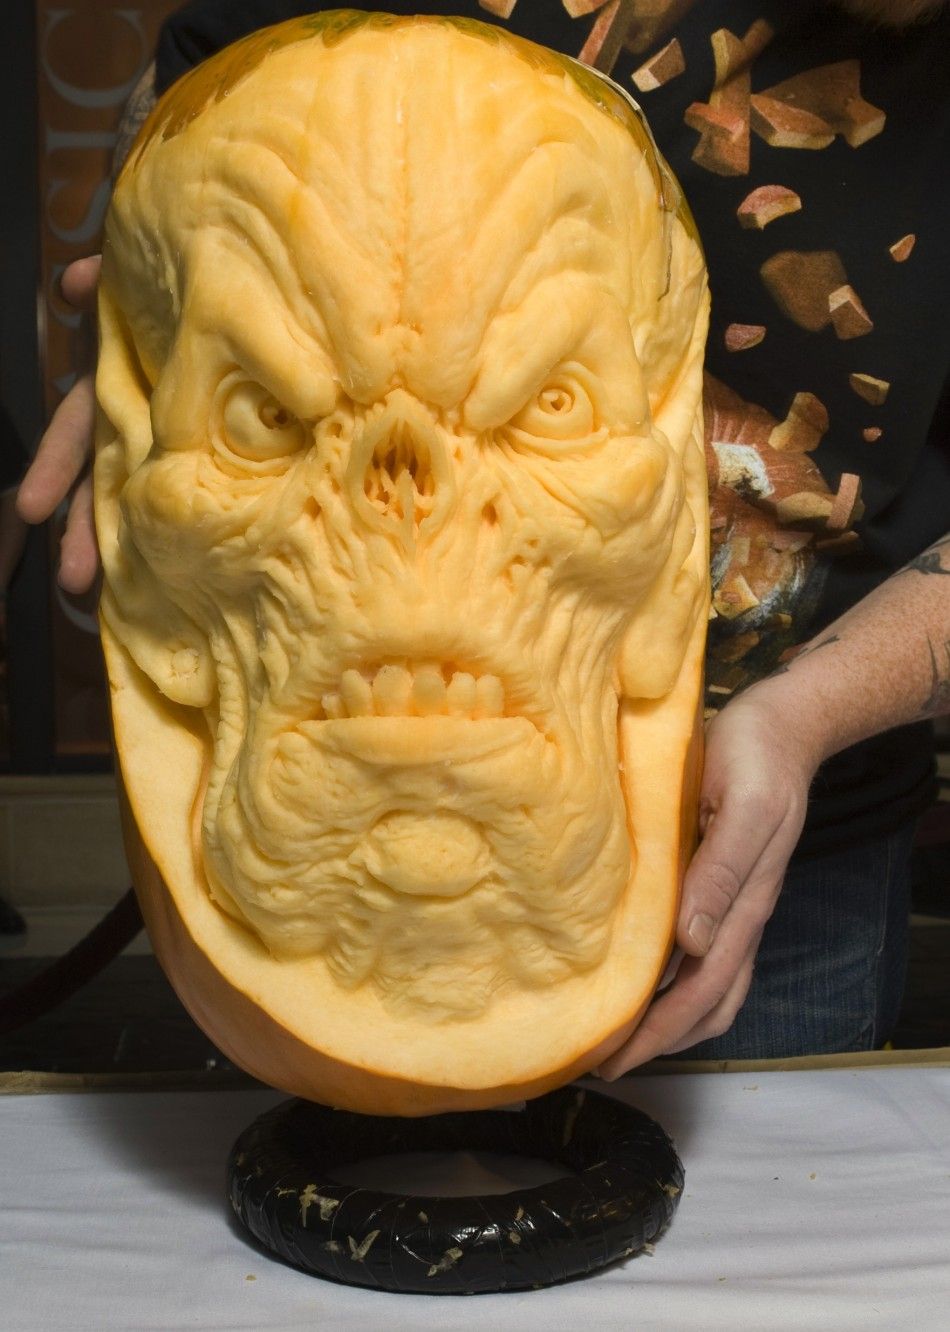 A pumpkin carved by artist Villafane is displayed during an exhibition in the Grand Canal Shoppes at The Venetian hotel-casino in Las Vegas